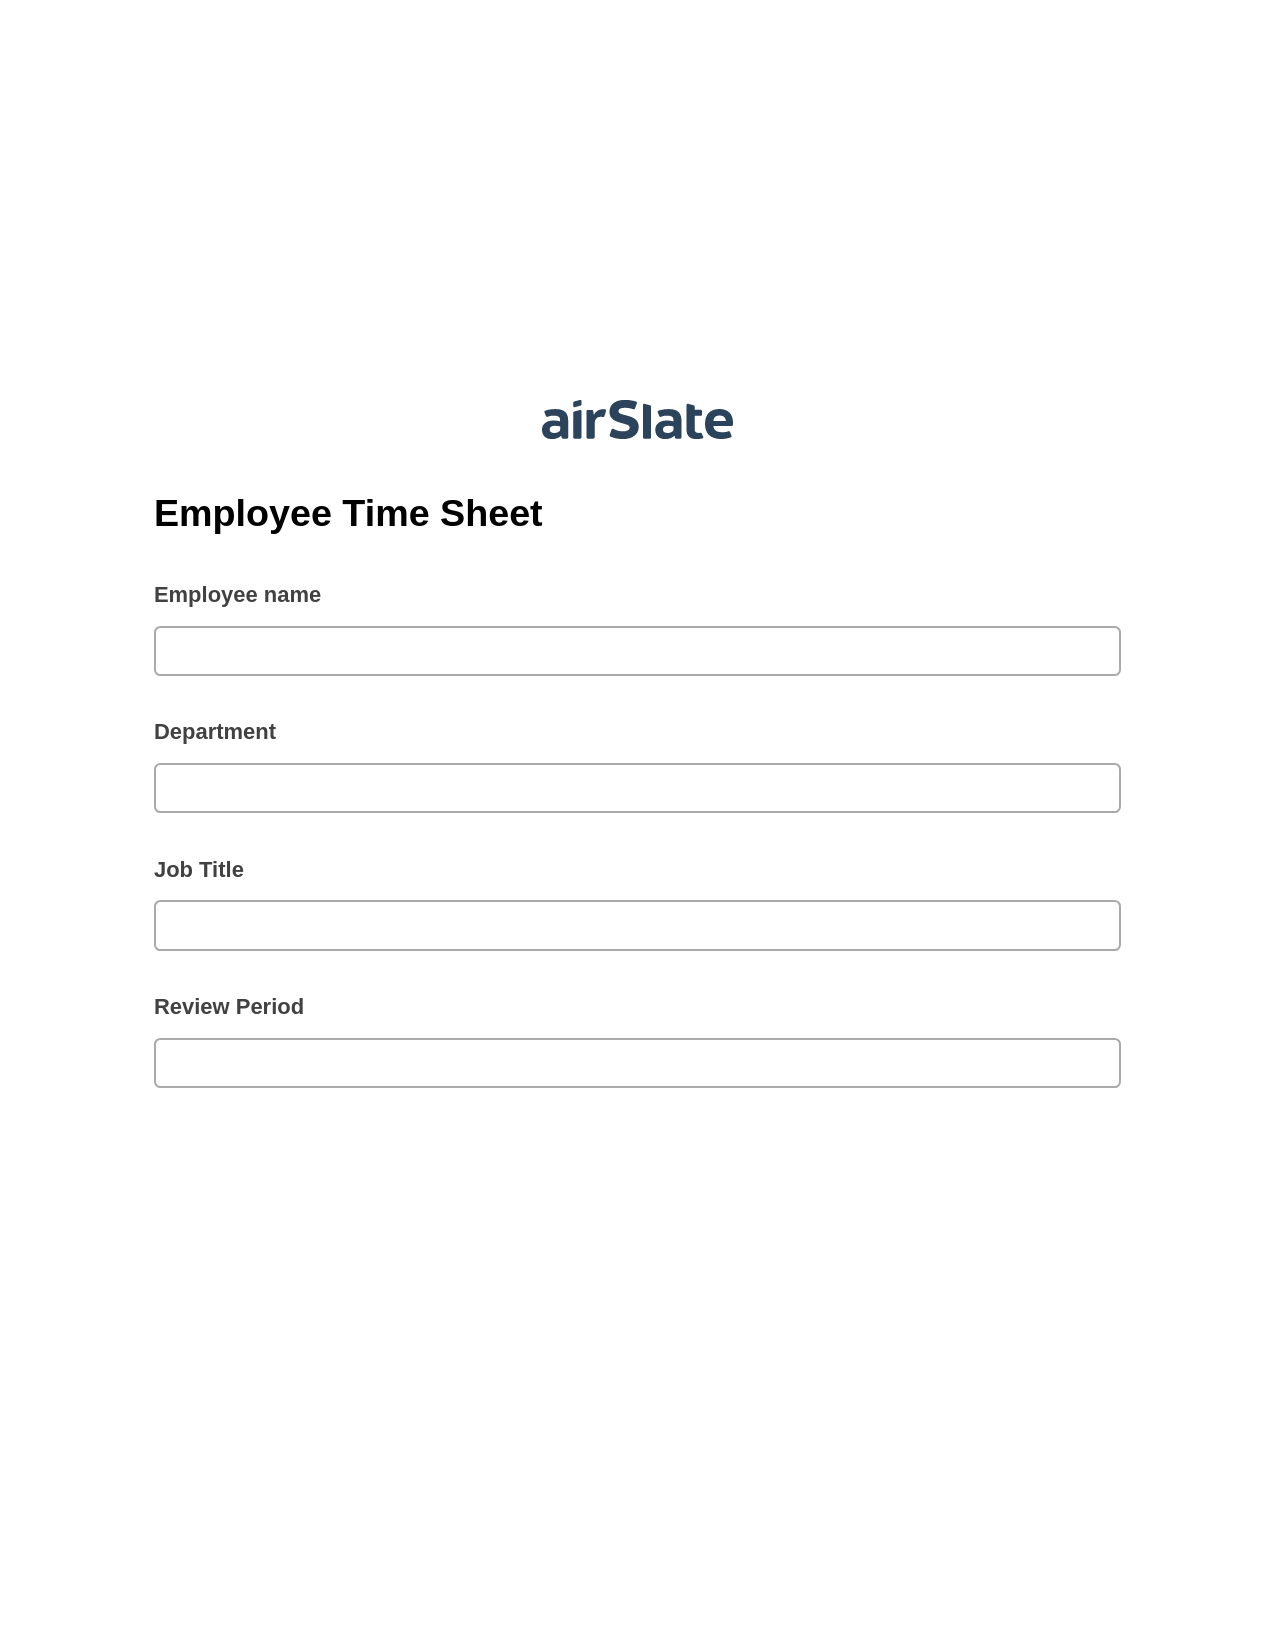 Multirole Employee Time Sheet Pre-fill from Salesforce Records with SOQL Bot, Create slate addon, Archive to Google Drive Bot